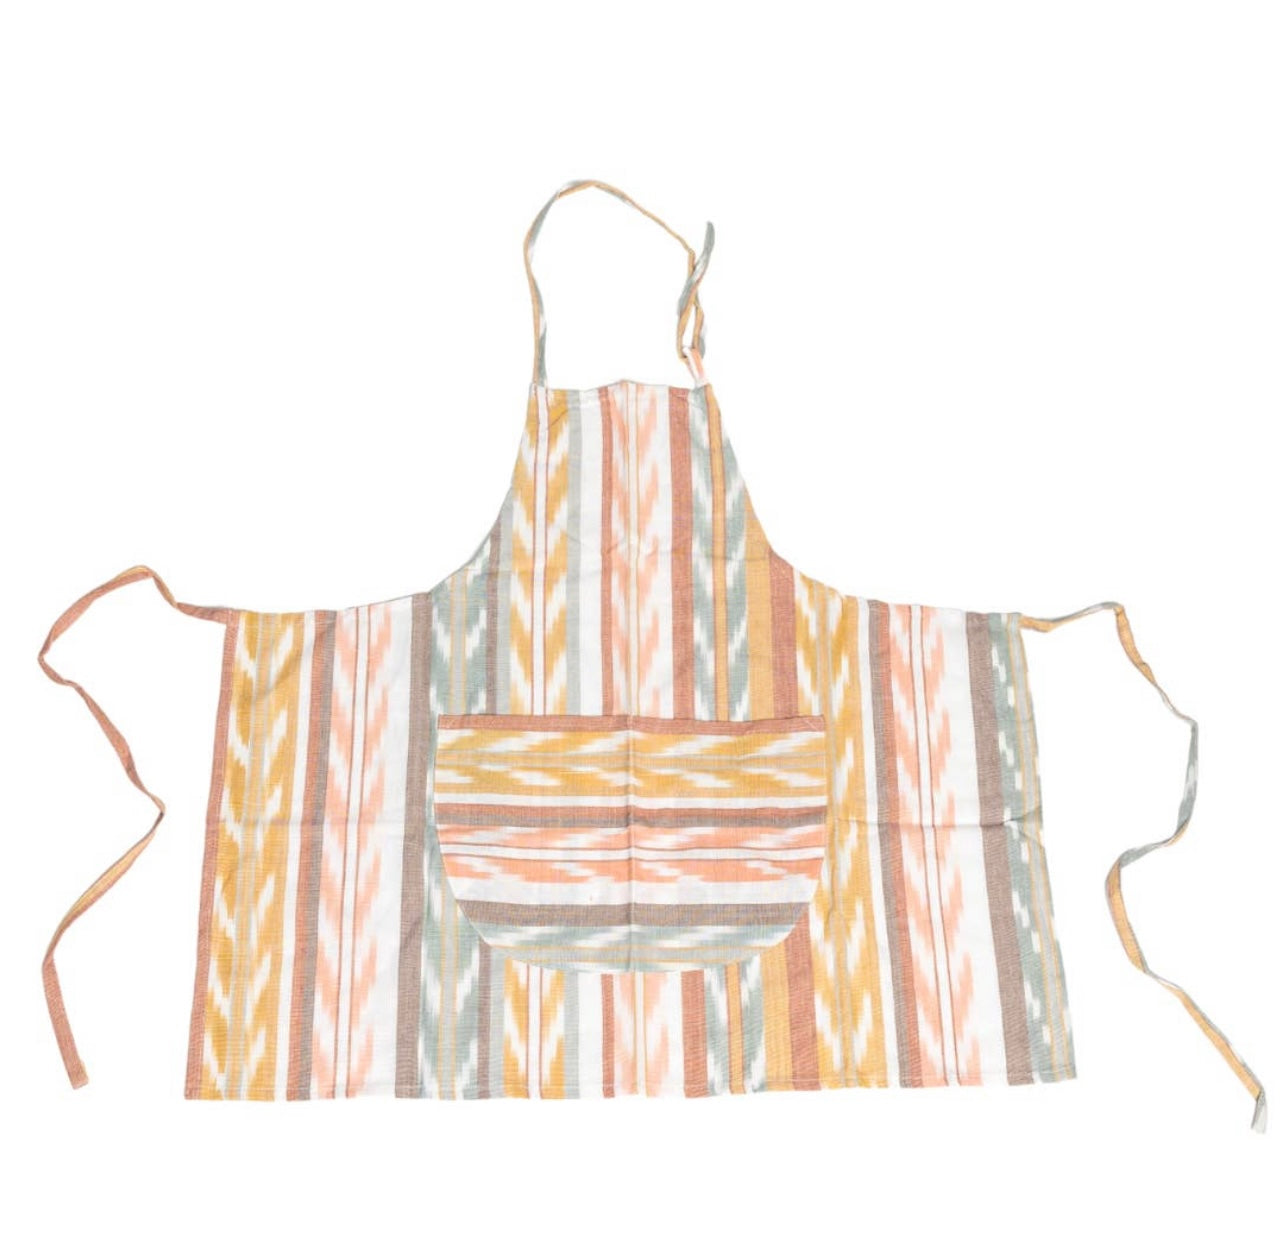 Cotton woven apron with a front pocket and features sand tone color stripes and chevron design.